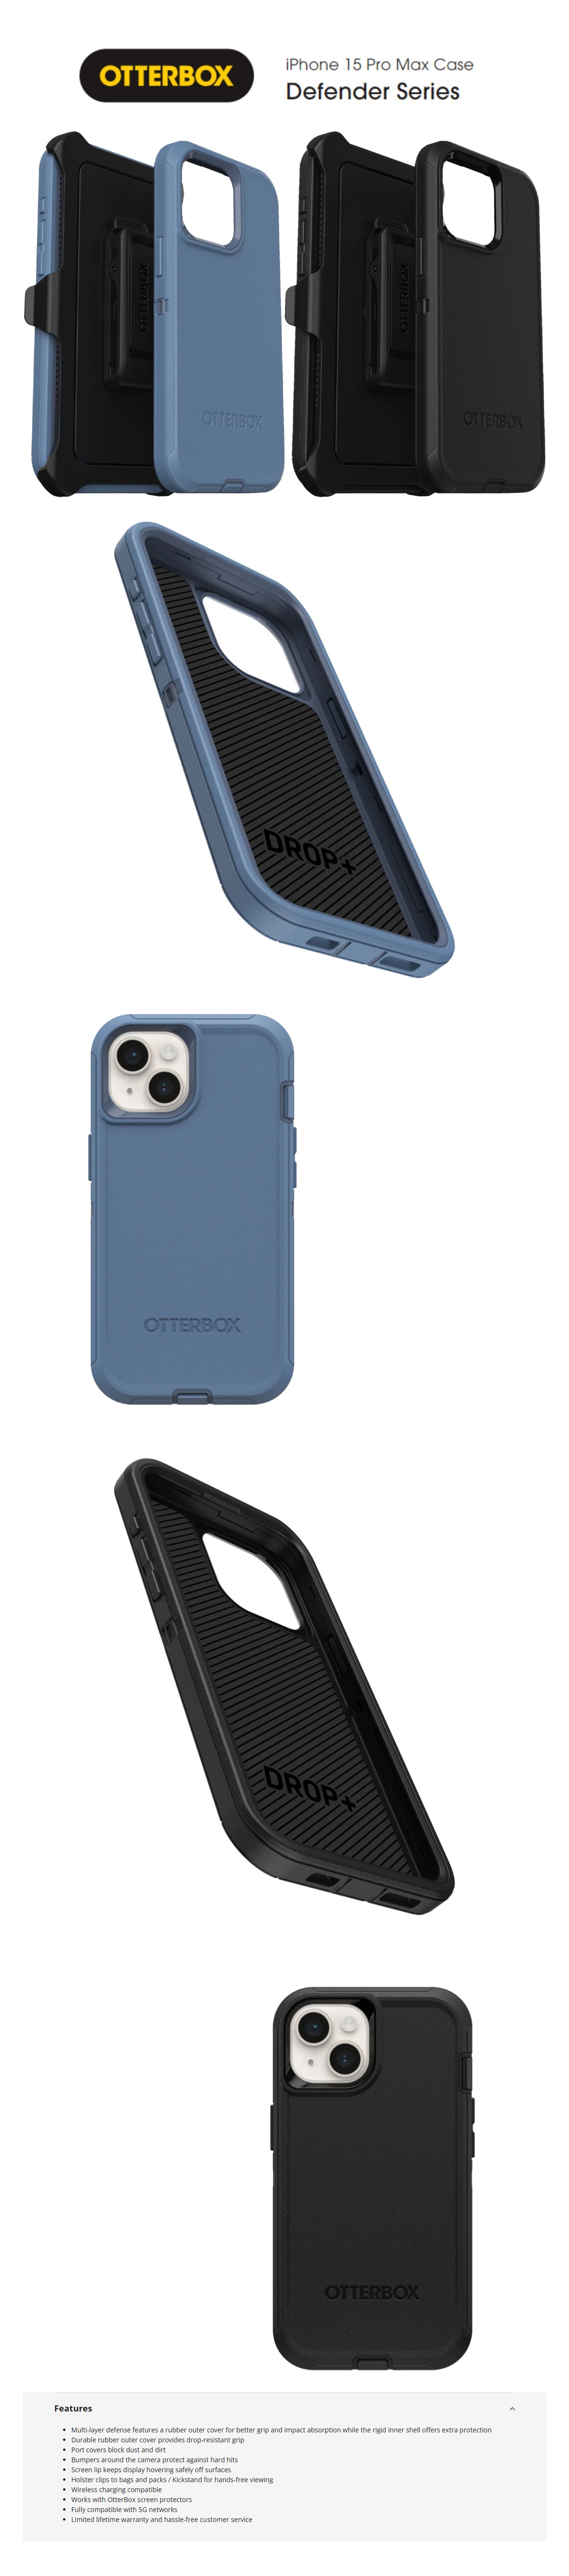 Otterbox Defender Series for iPhone 15 Pro Max with Holster Clips